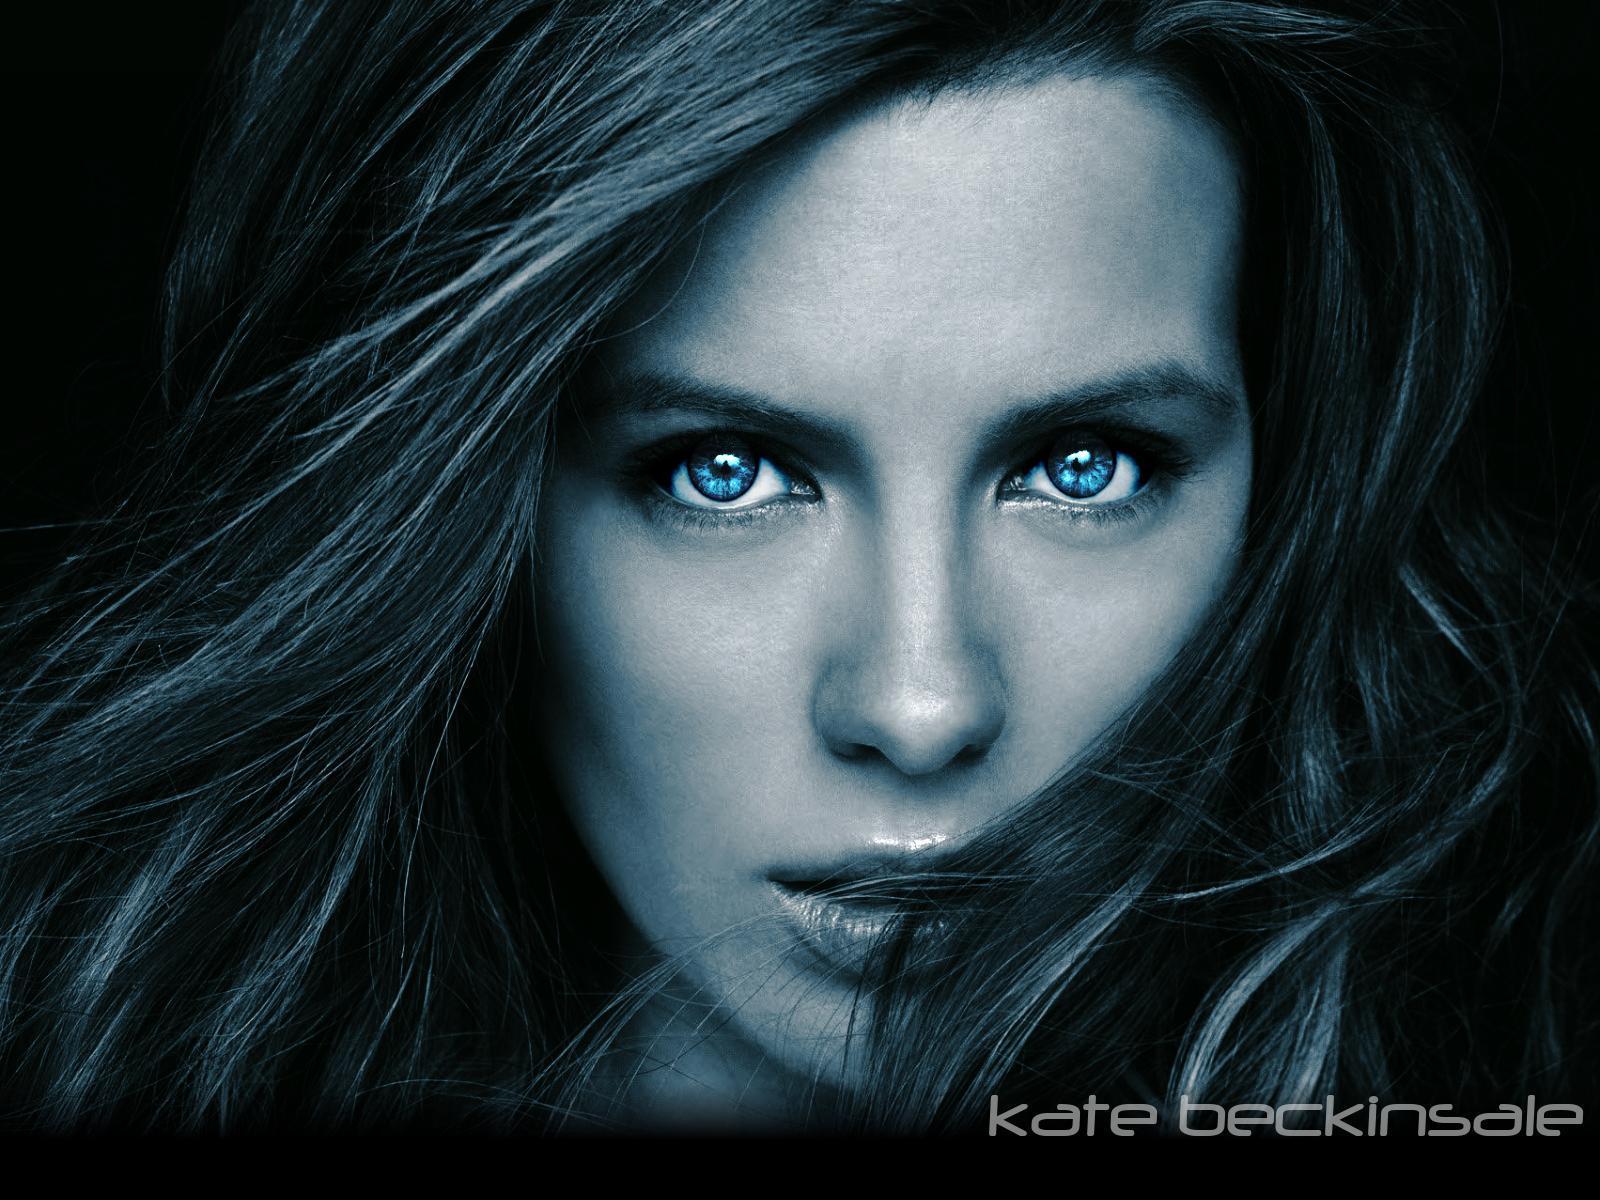 Kate Beckinsale Wallpaper Image & Picture